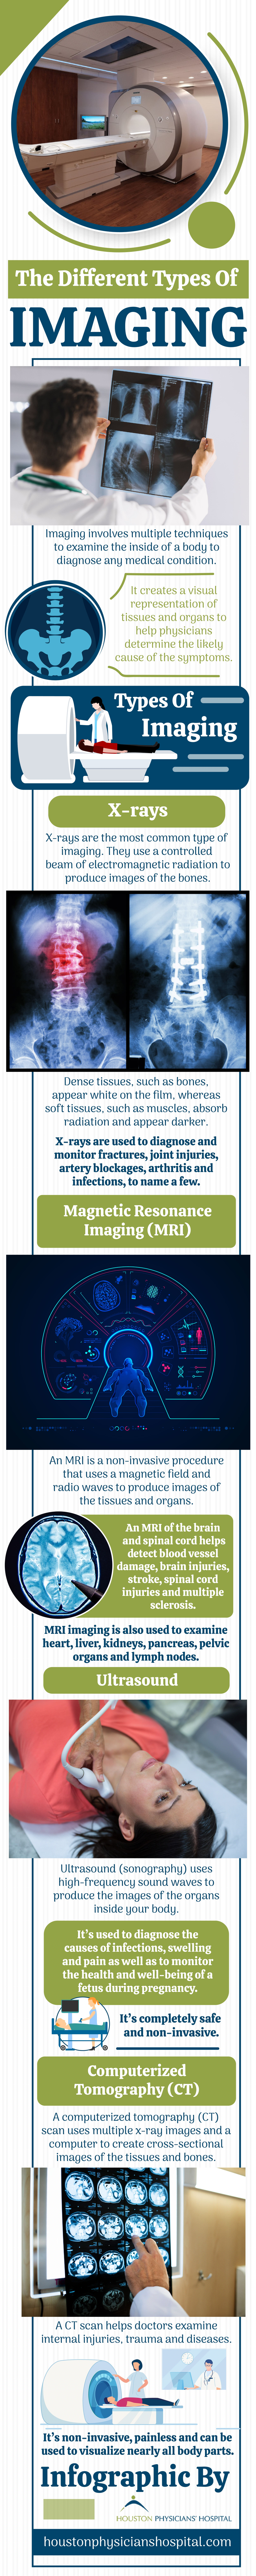 The Different Types of Imaging